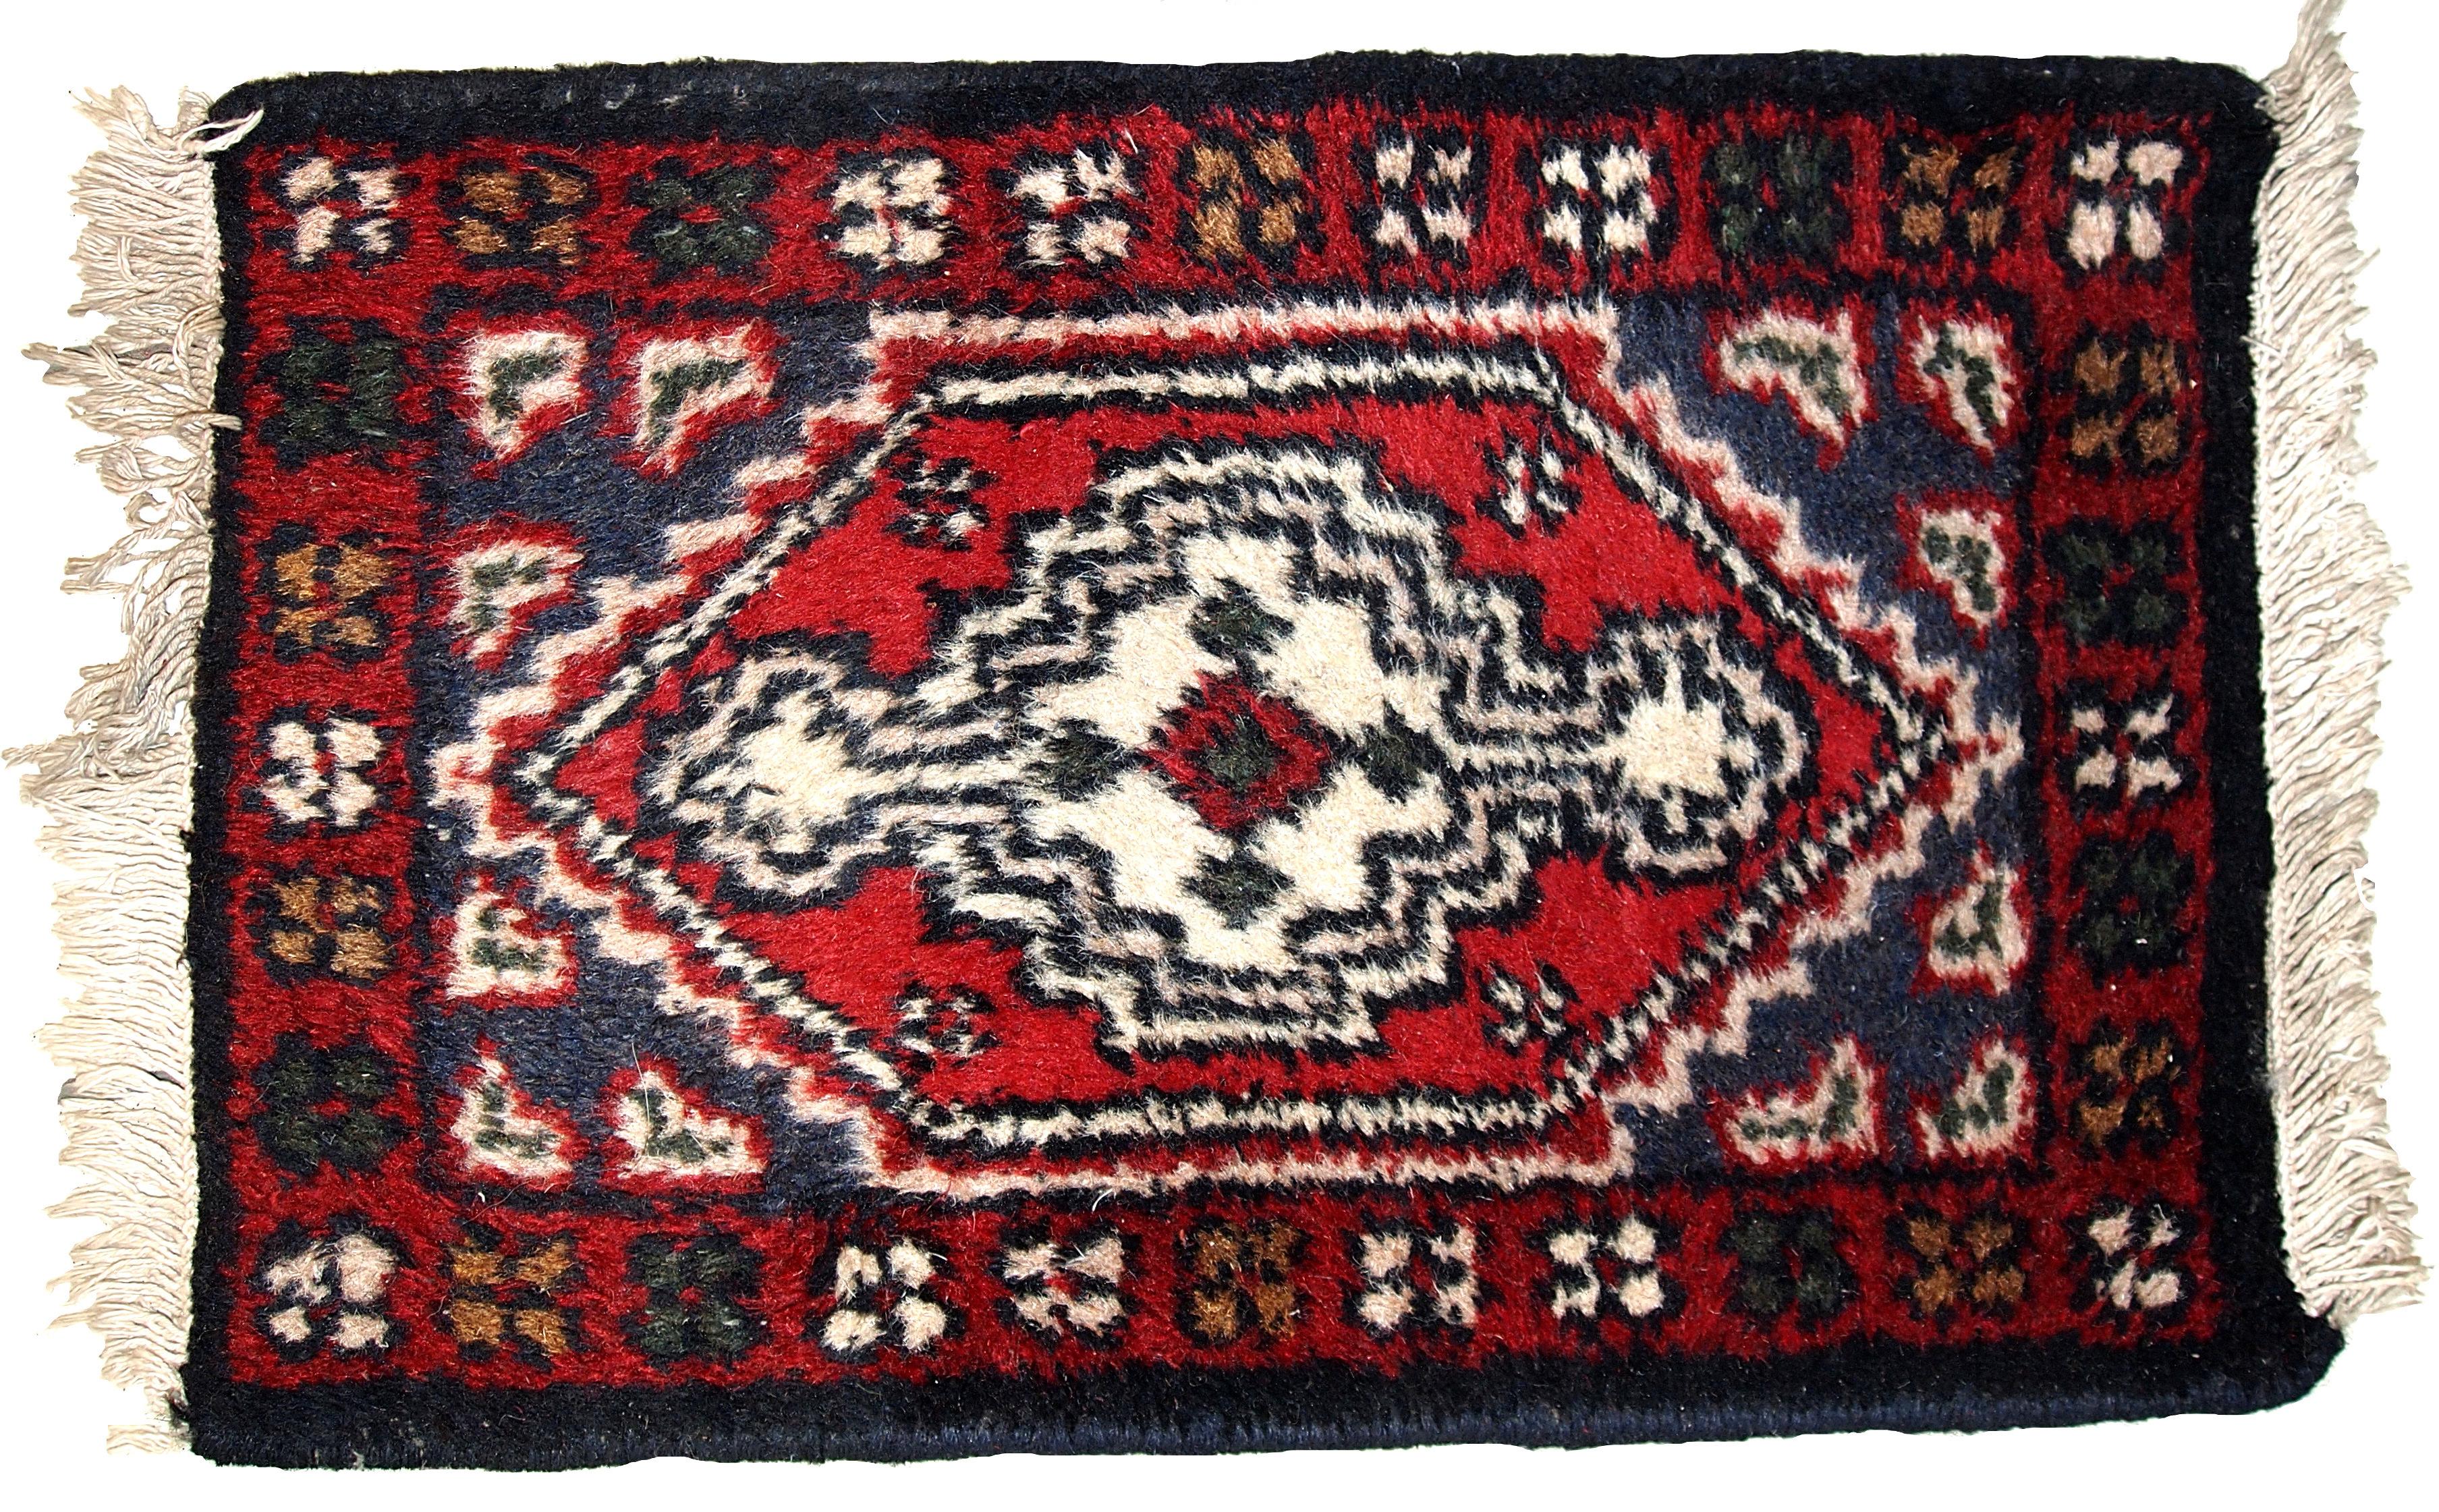 Vintage handmade Hamadan style mat from the end of 20th century. It is in original good condition.

- Condition: original good,

- circa 1970s,

- Size: 1.2' x 1.8' (38cm x 56cm),

- Material: wool,

- Country of origin: Middle East,

-